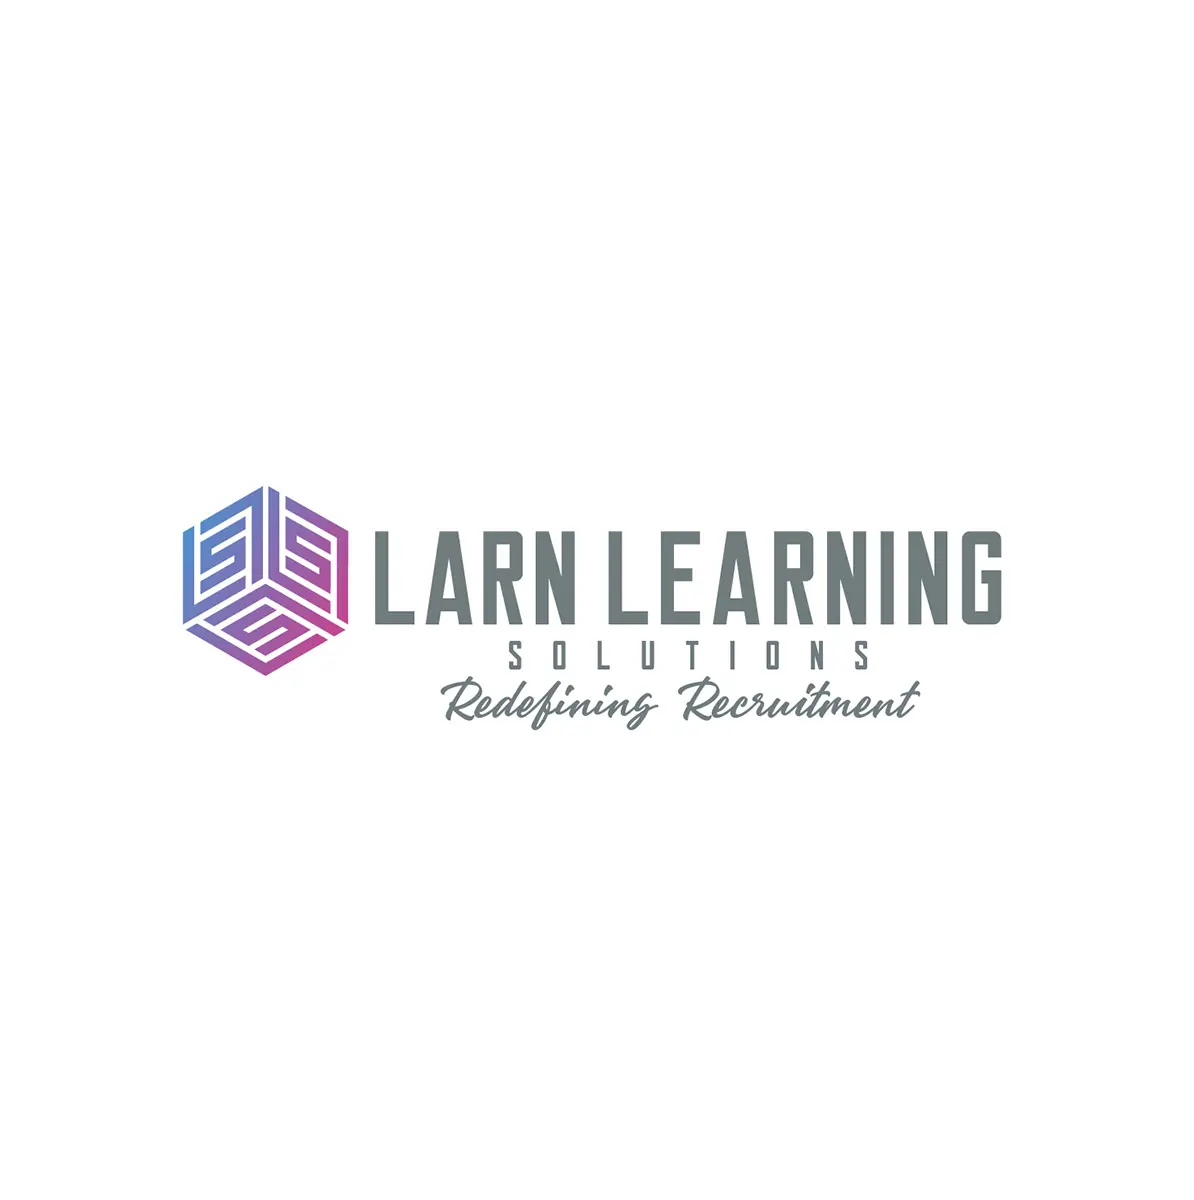 Larn Learning Solutions